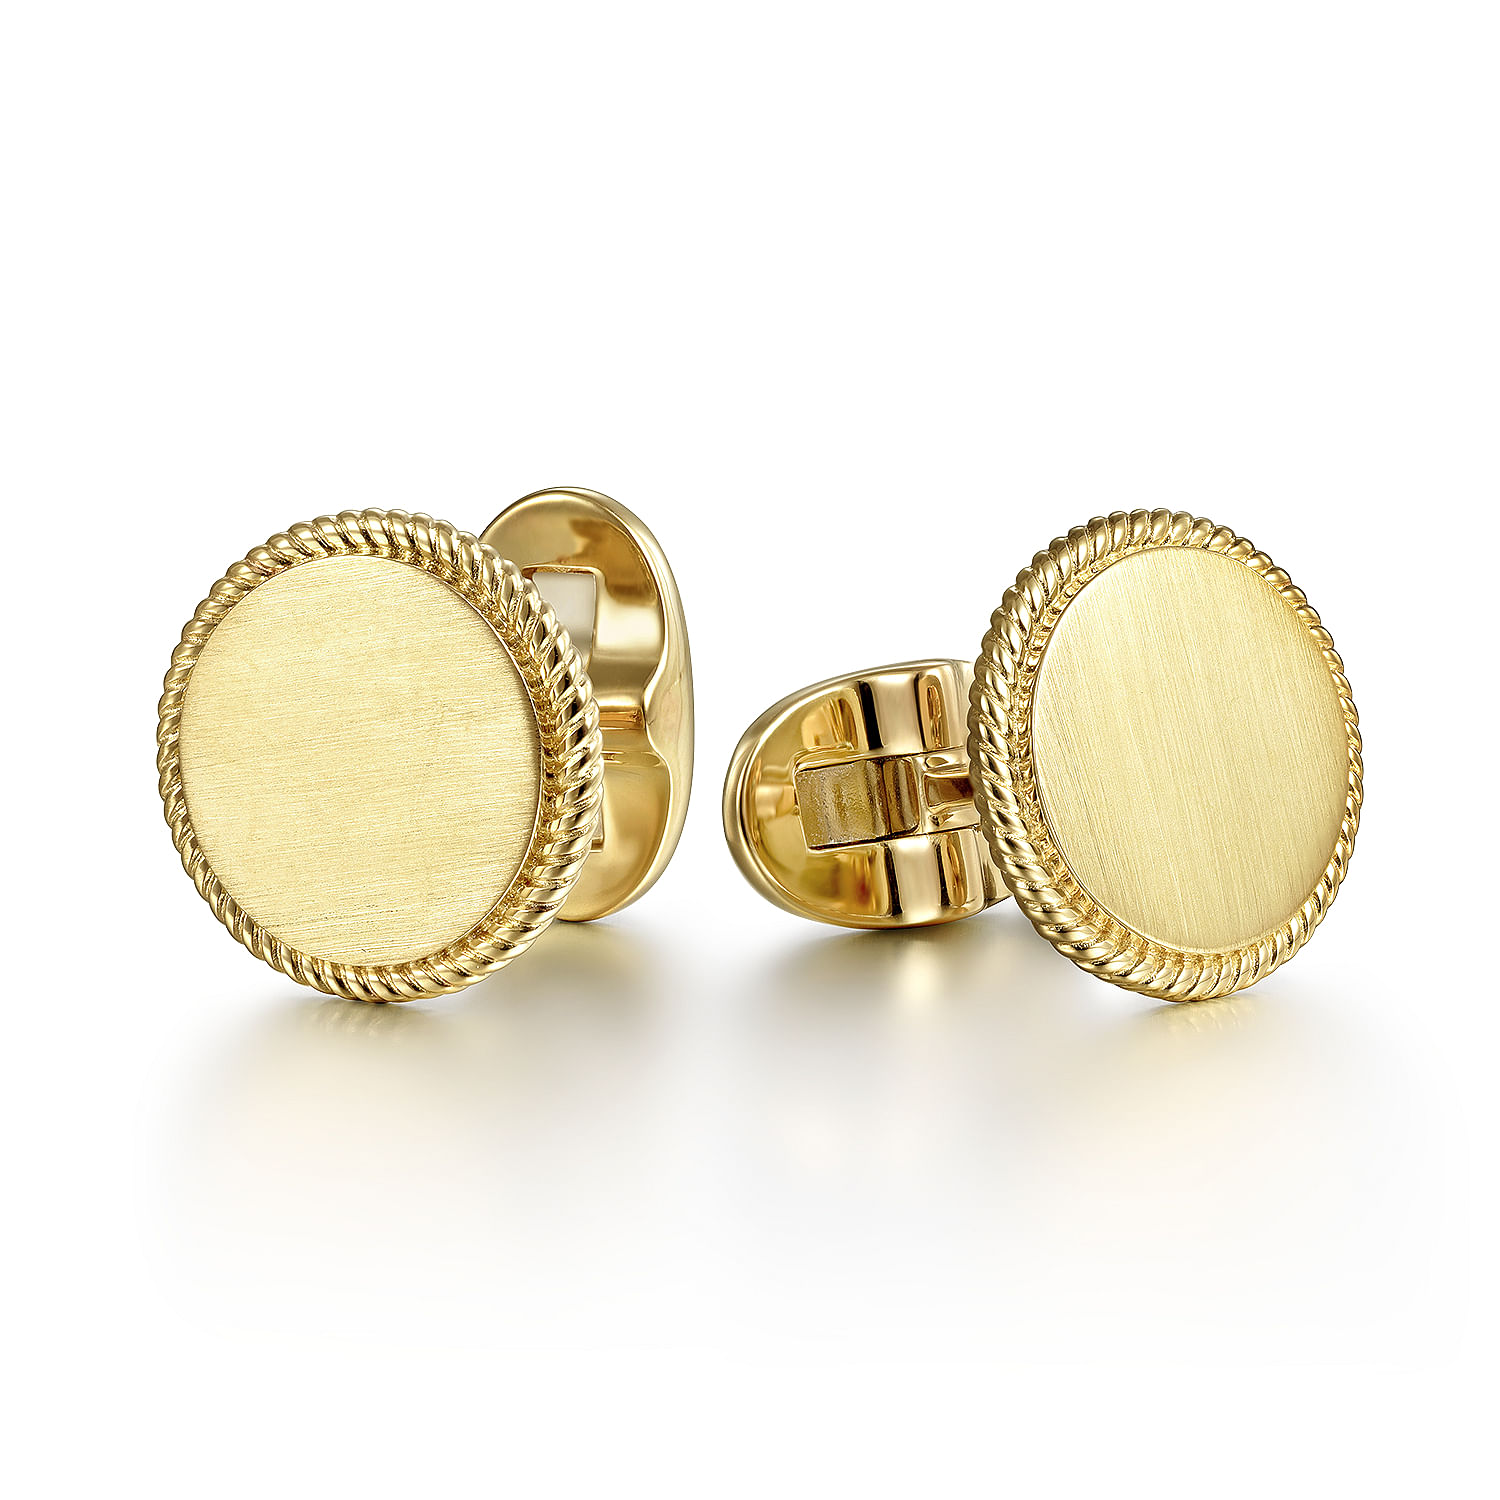 14K Yellow Gold Round Cufflinks with Twisted Rope Trim